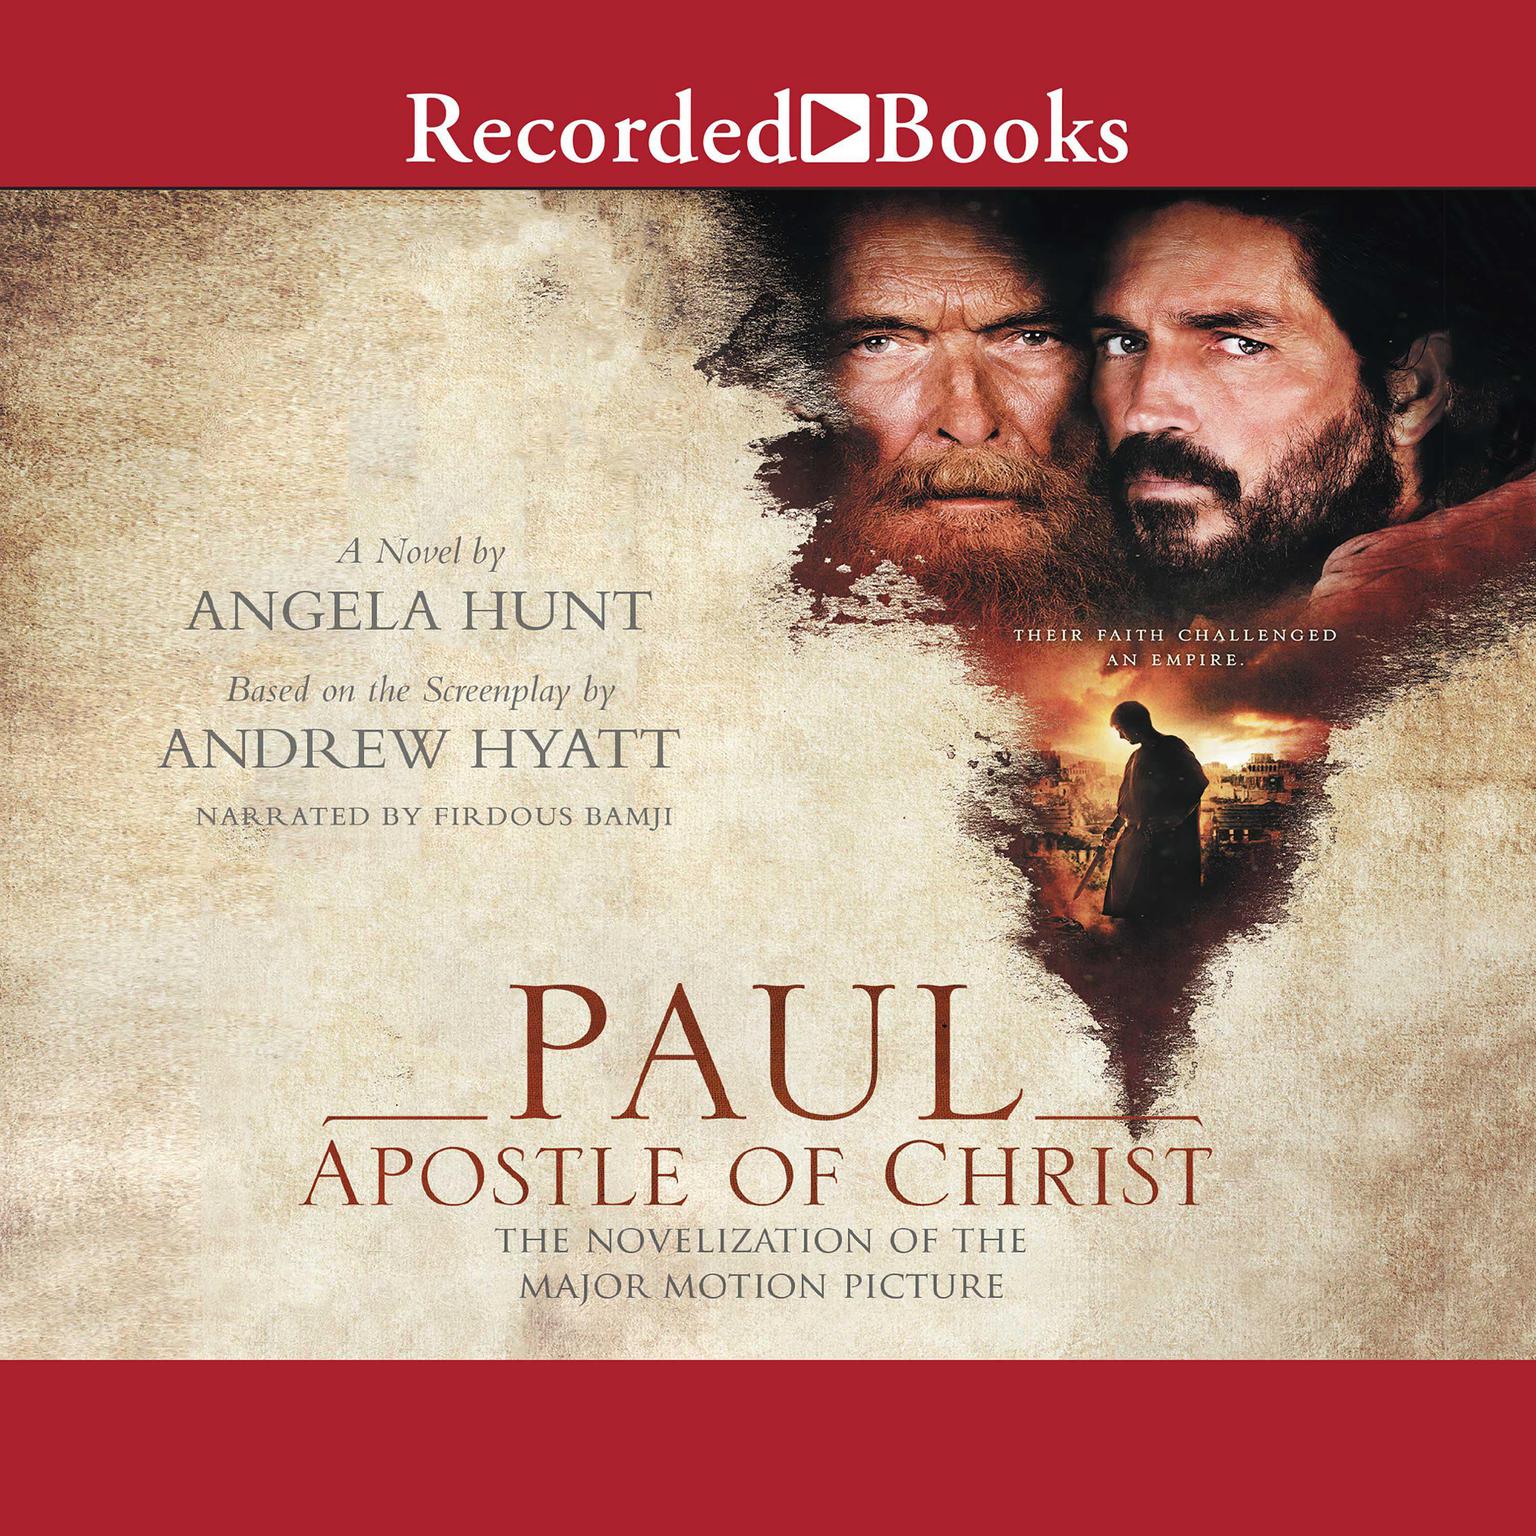 Paul, Apostle of Christ: The Novelization of the Major Motion Picture Audiobook, by Angela Hunt